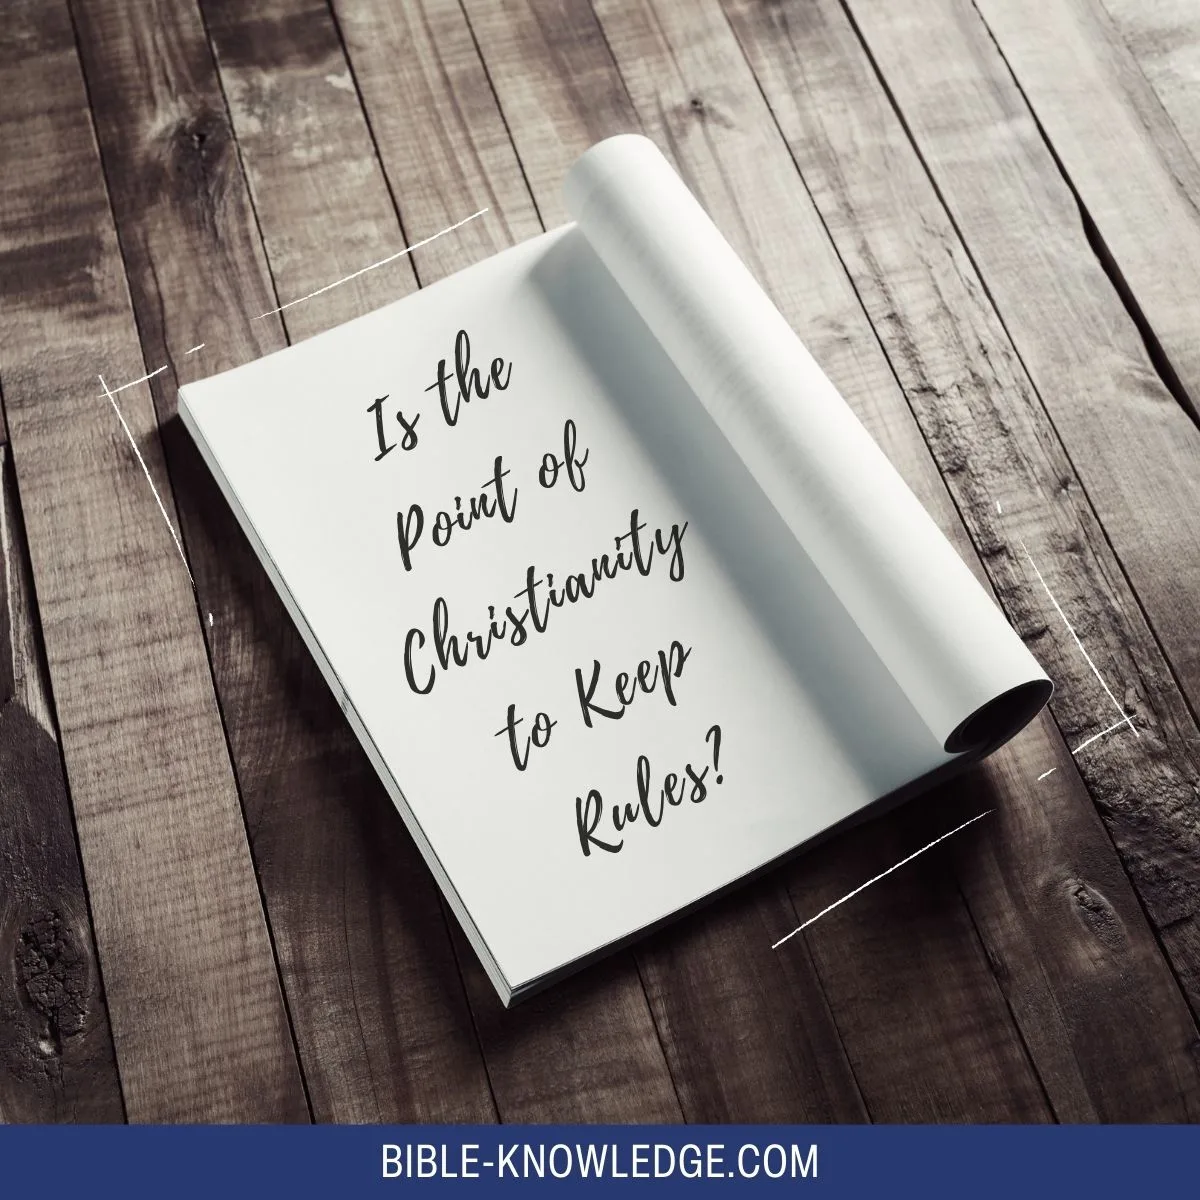 Is the Point of Christianity to Keep Rules?